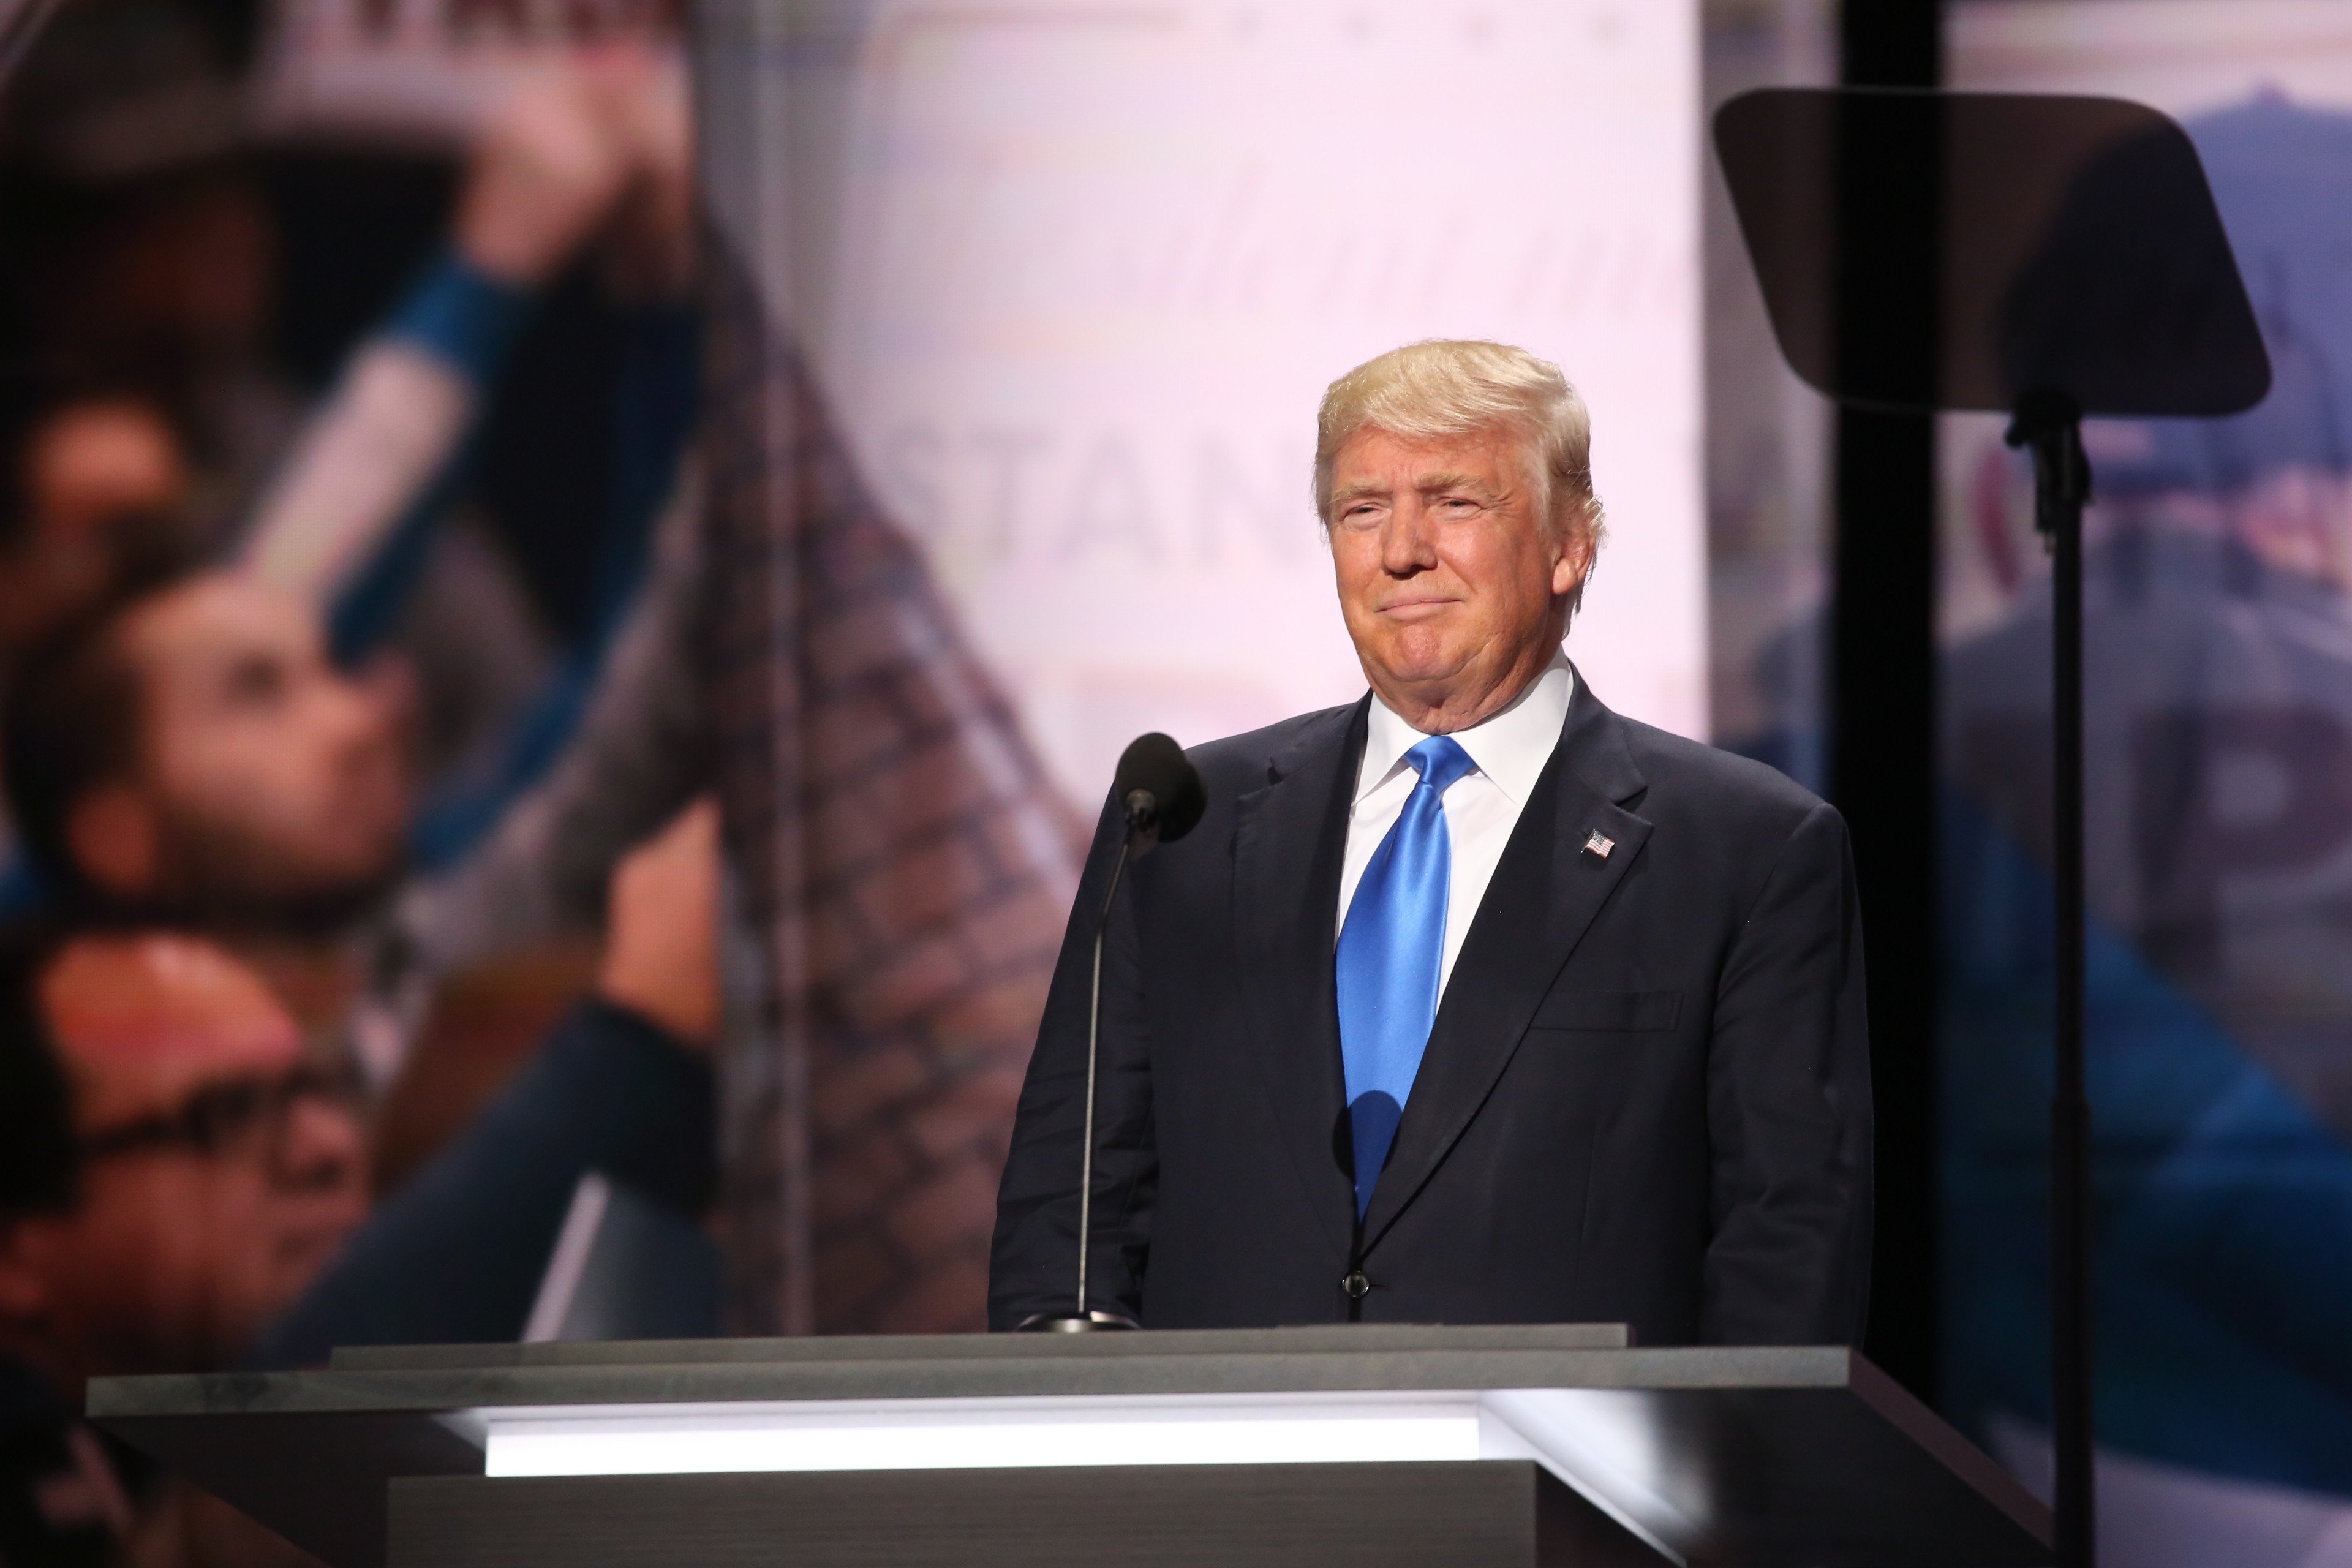 Donald Trump speaks at the Republican National Convention on July 18, 2016.